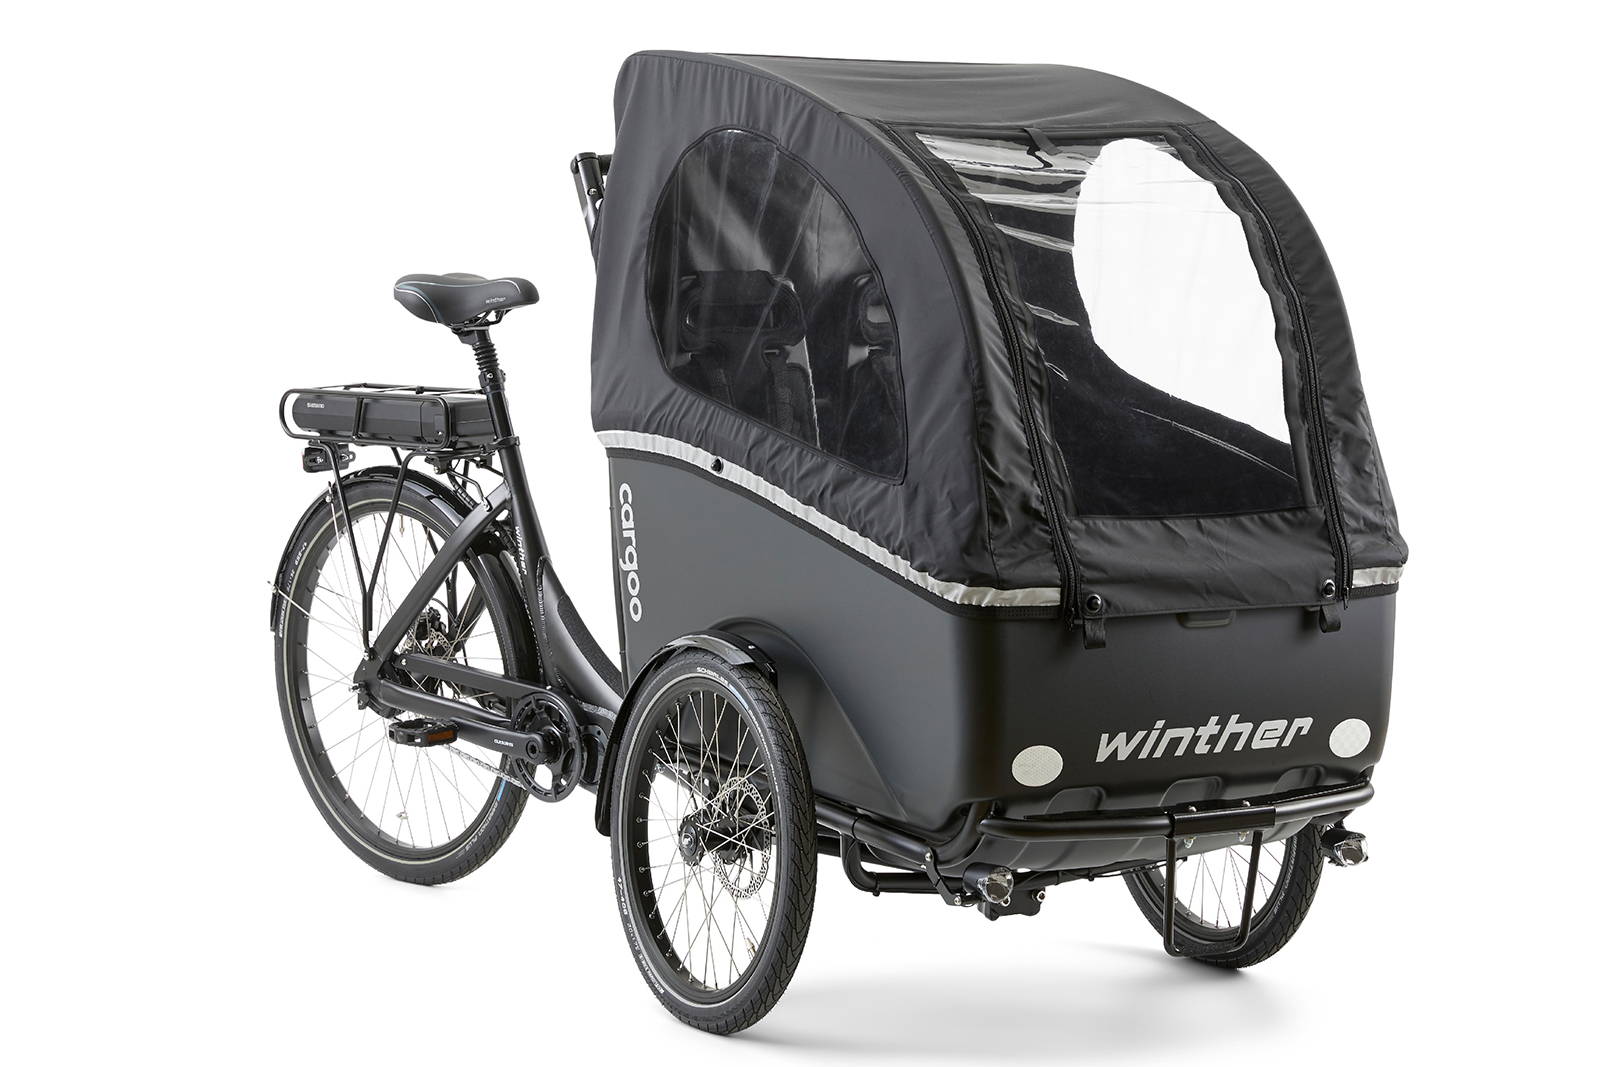 Angled front view of a Winther Cargoo cargo bike in black with black rain canopy